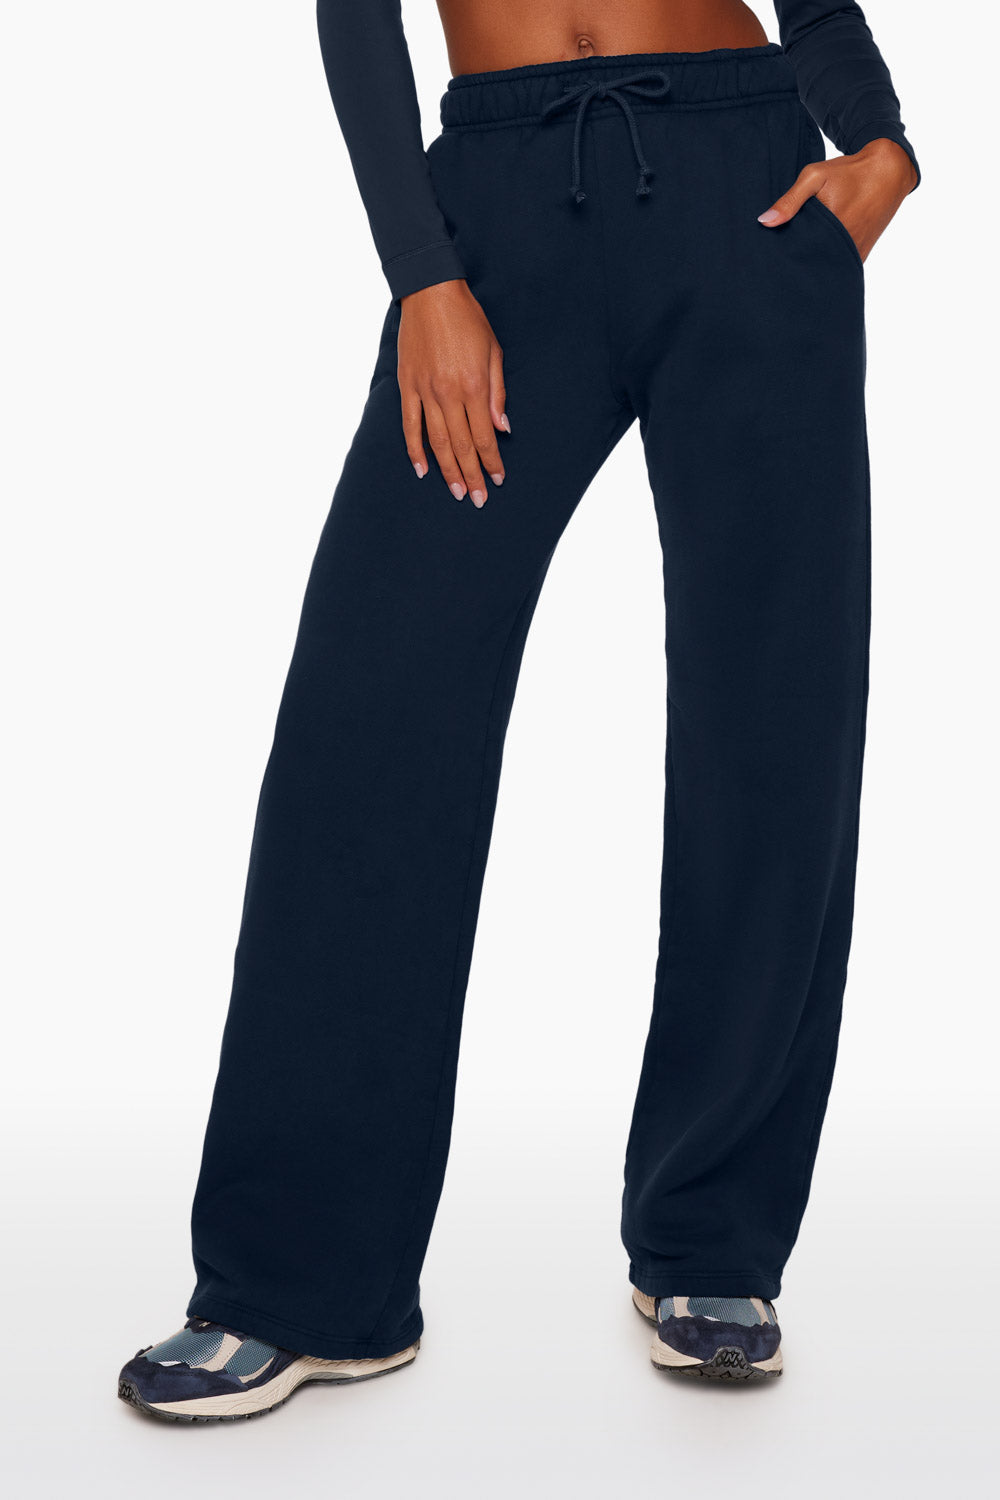 WIDE LEG SWEATPANTS - OXFORD Featured Image